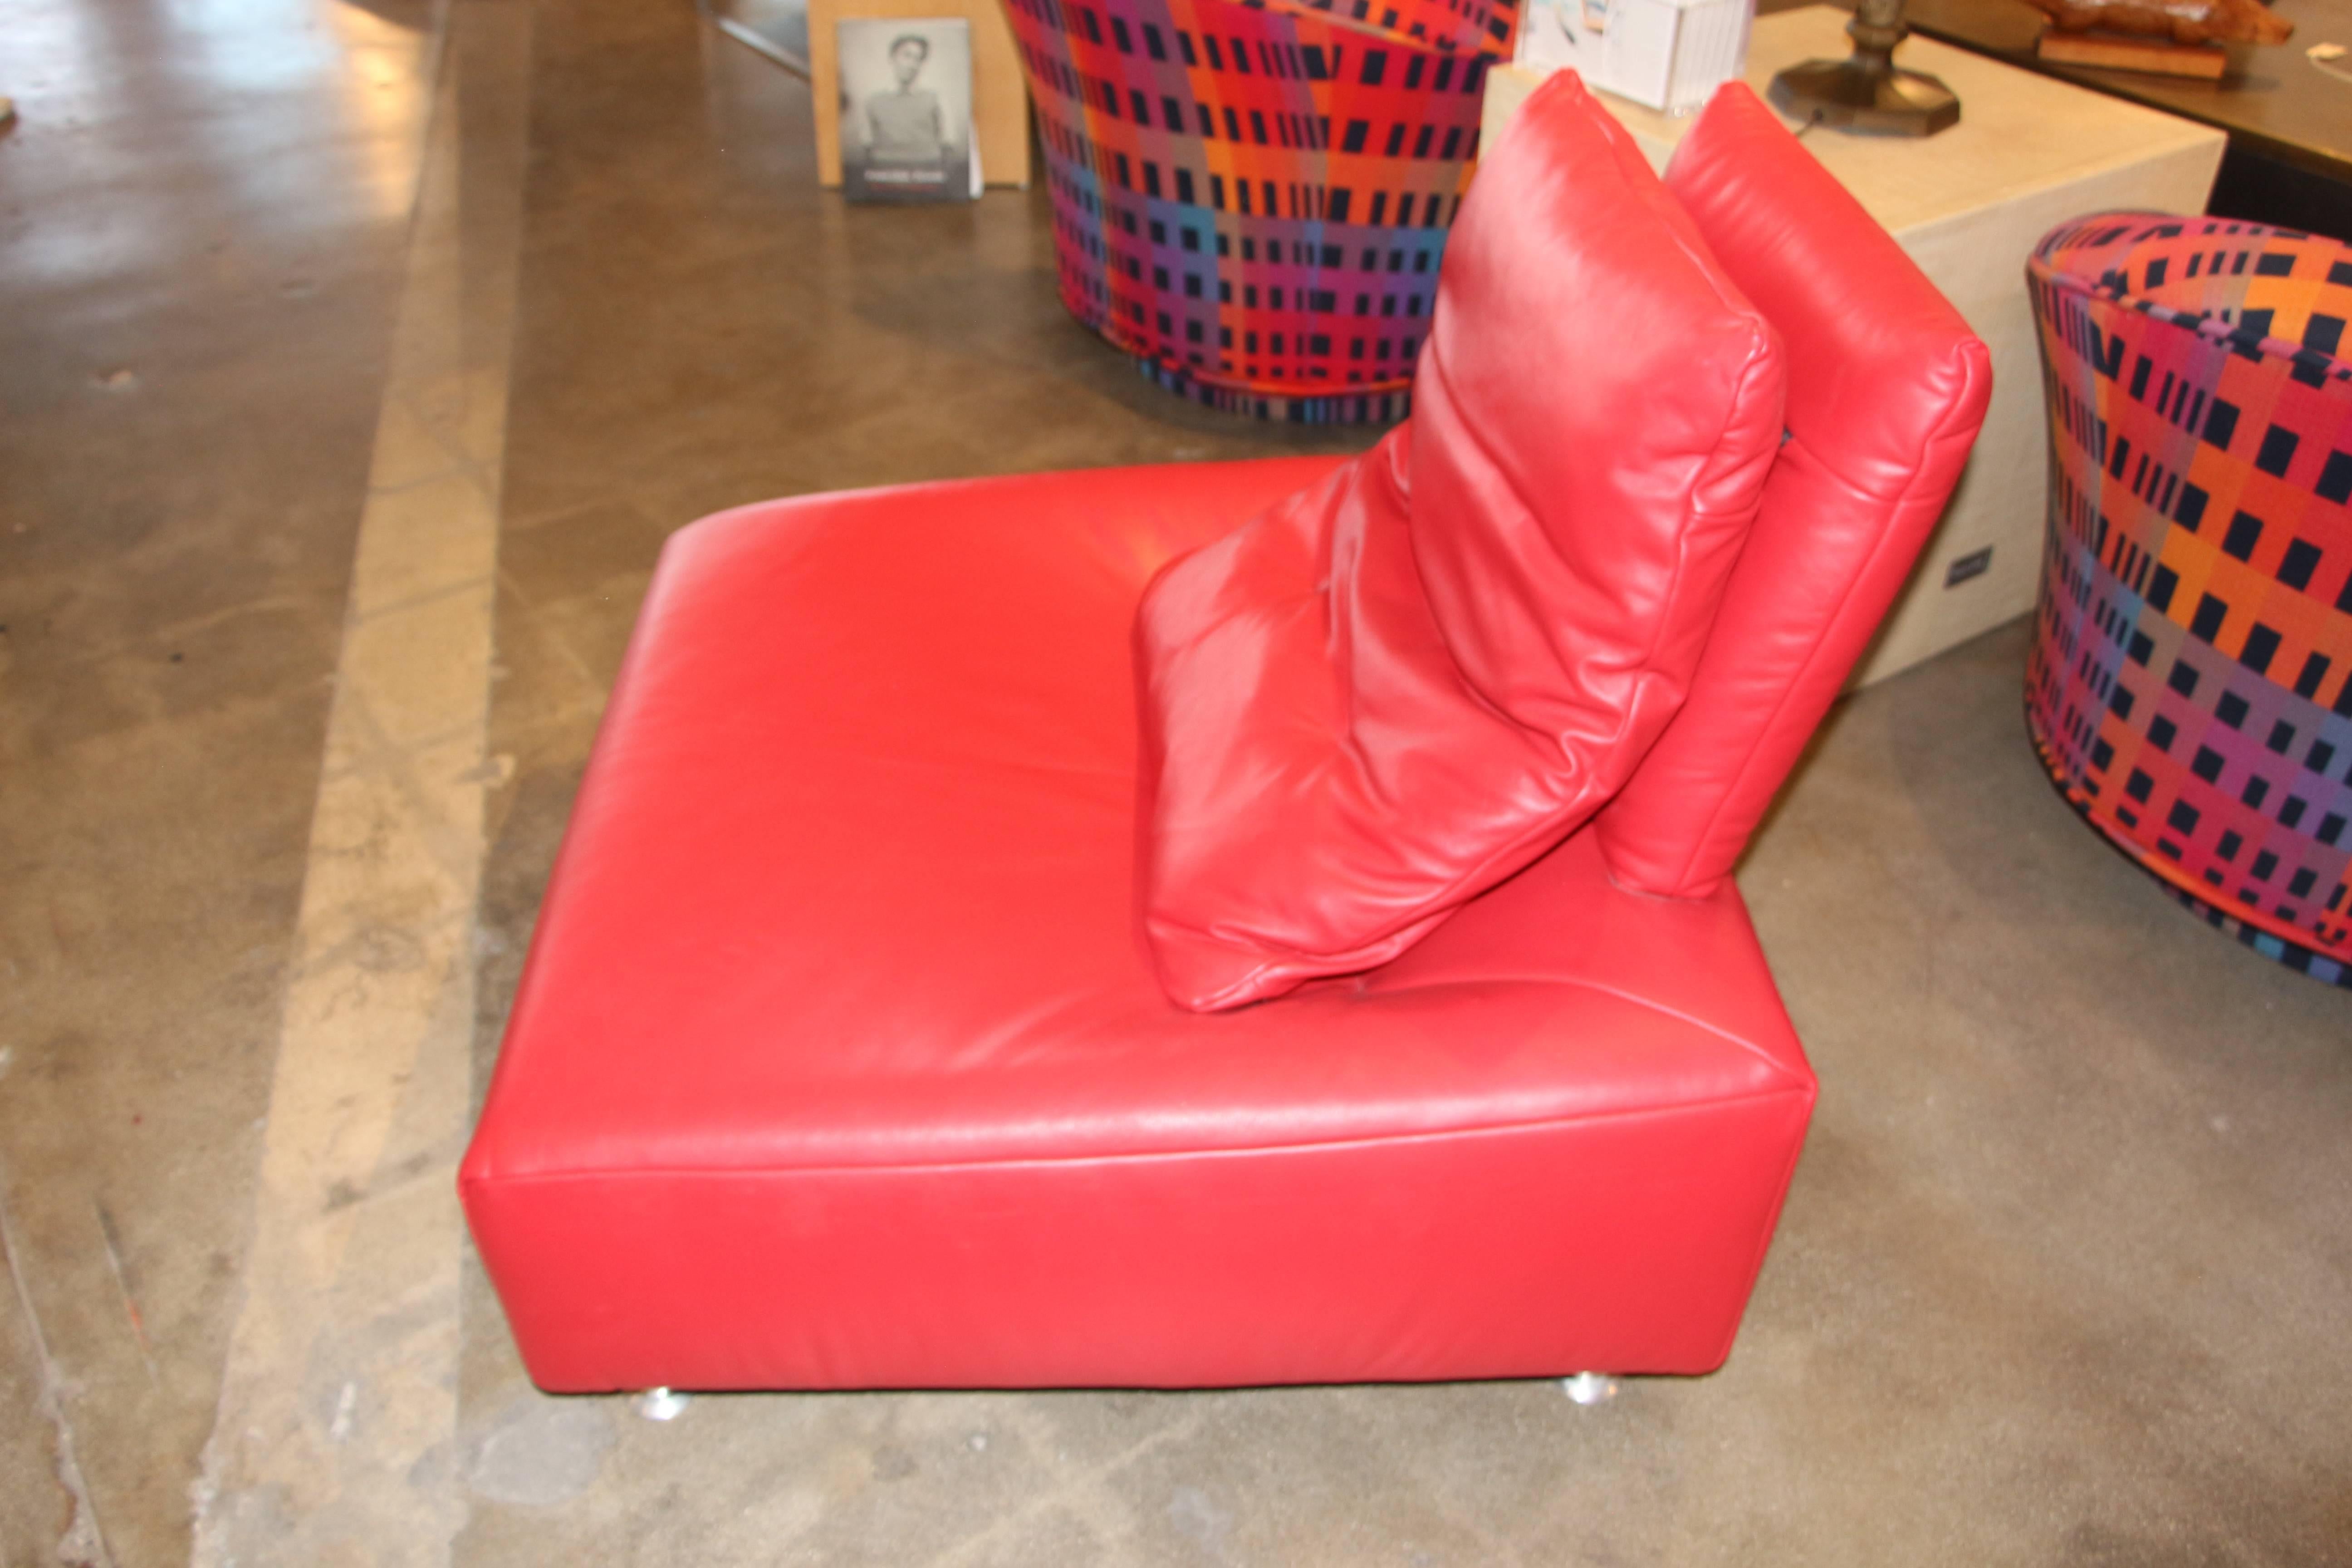 Fabulous Soft Red Leather Italian Lounge Chair That Floats and Wiggles 1